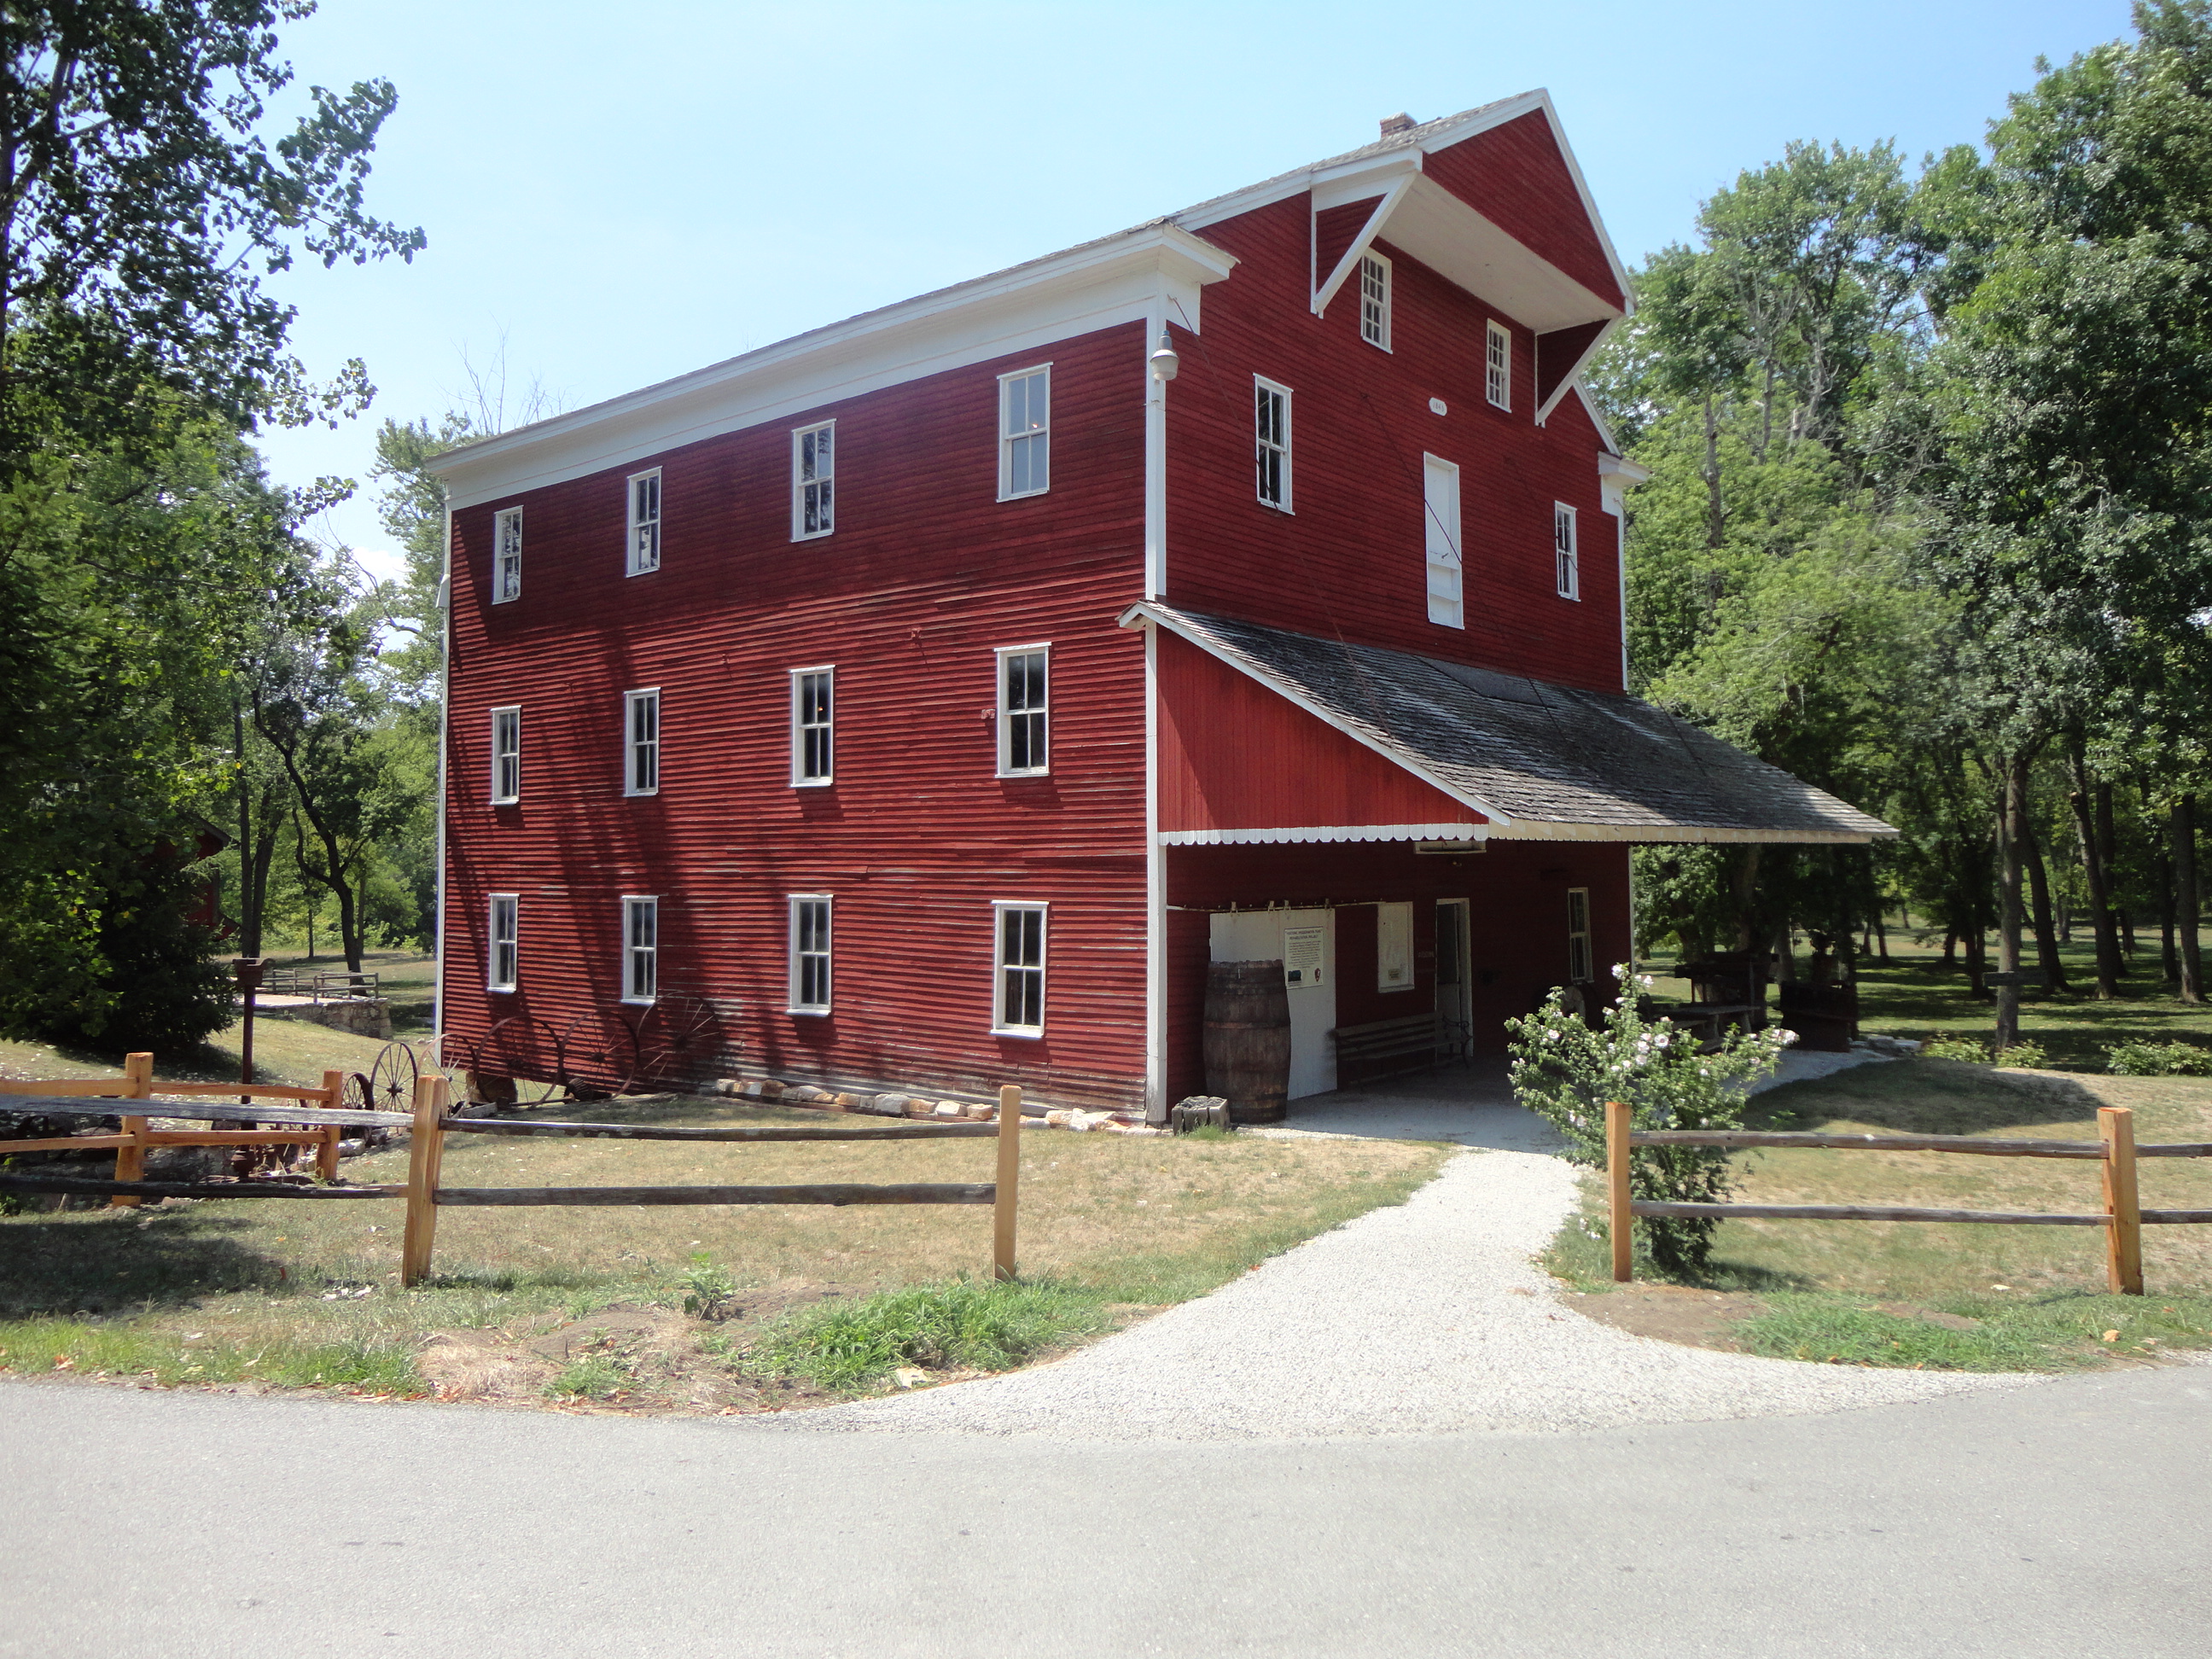 Women on a mission, visited Adams Mill